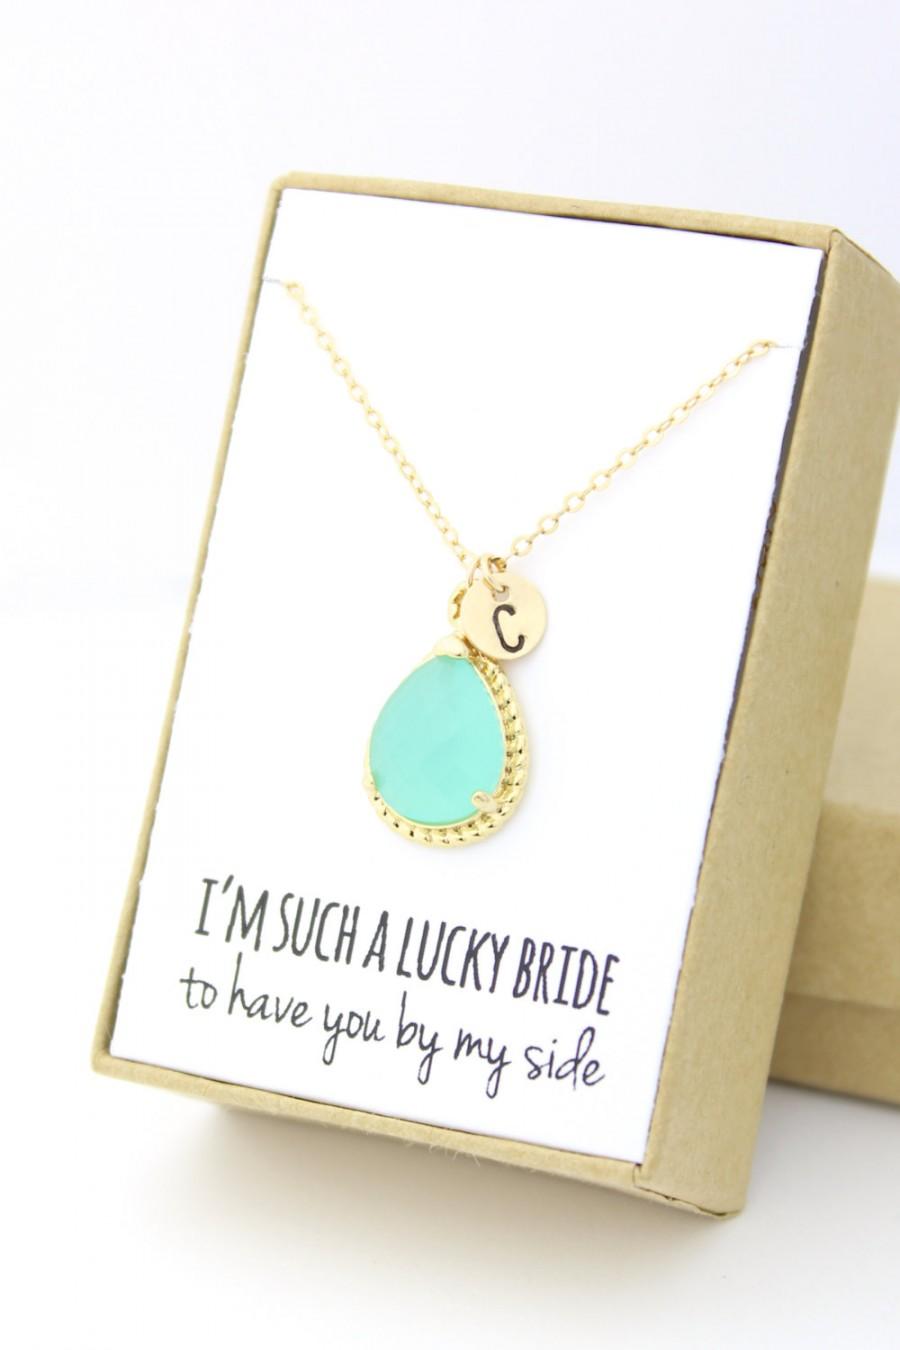 Wedding - Mint Green / Gold Rope Rim Necklace - Mint Opal Necklace -Personalized Bridesmaid Necklace - Bridesmaid Gift -Mint Bridesmaid Jewelry NR1